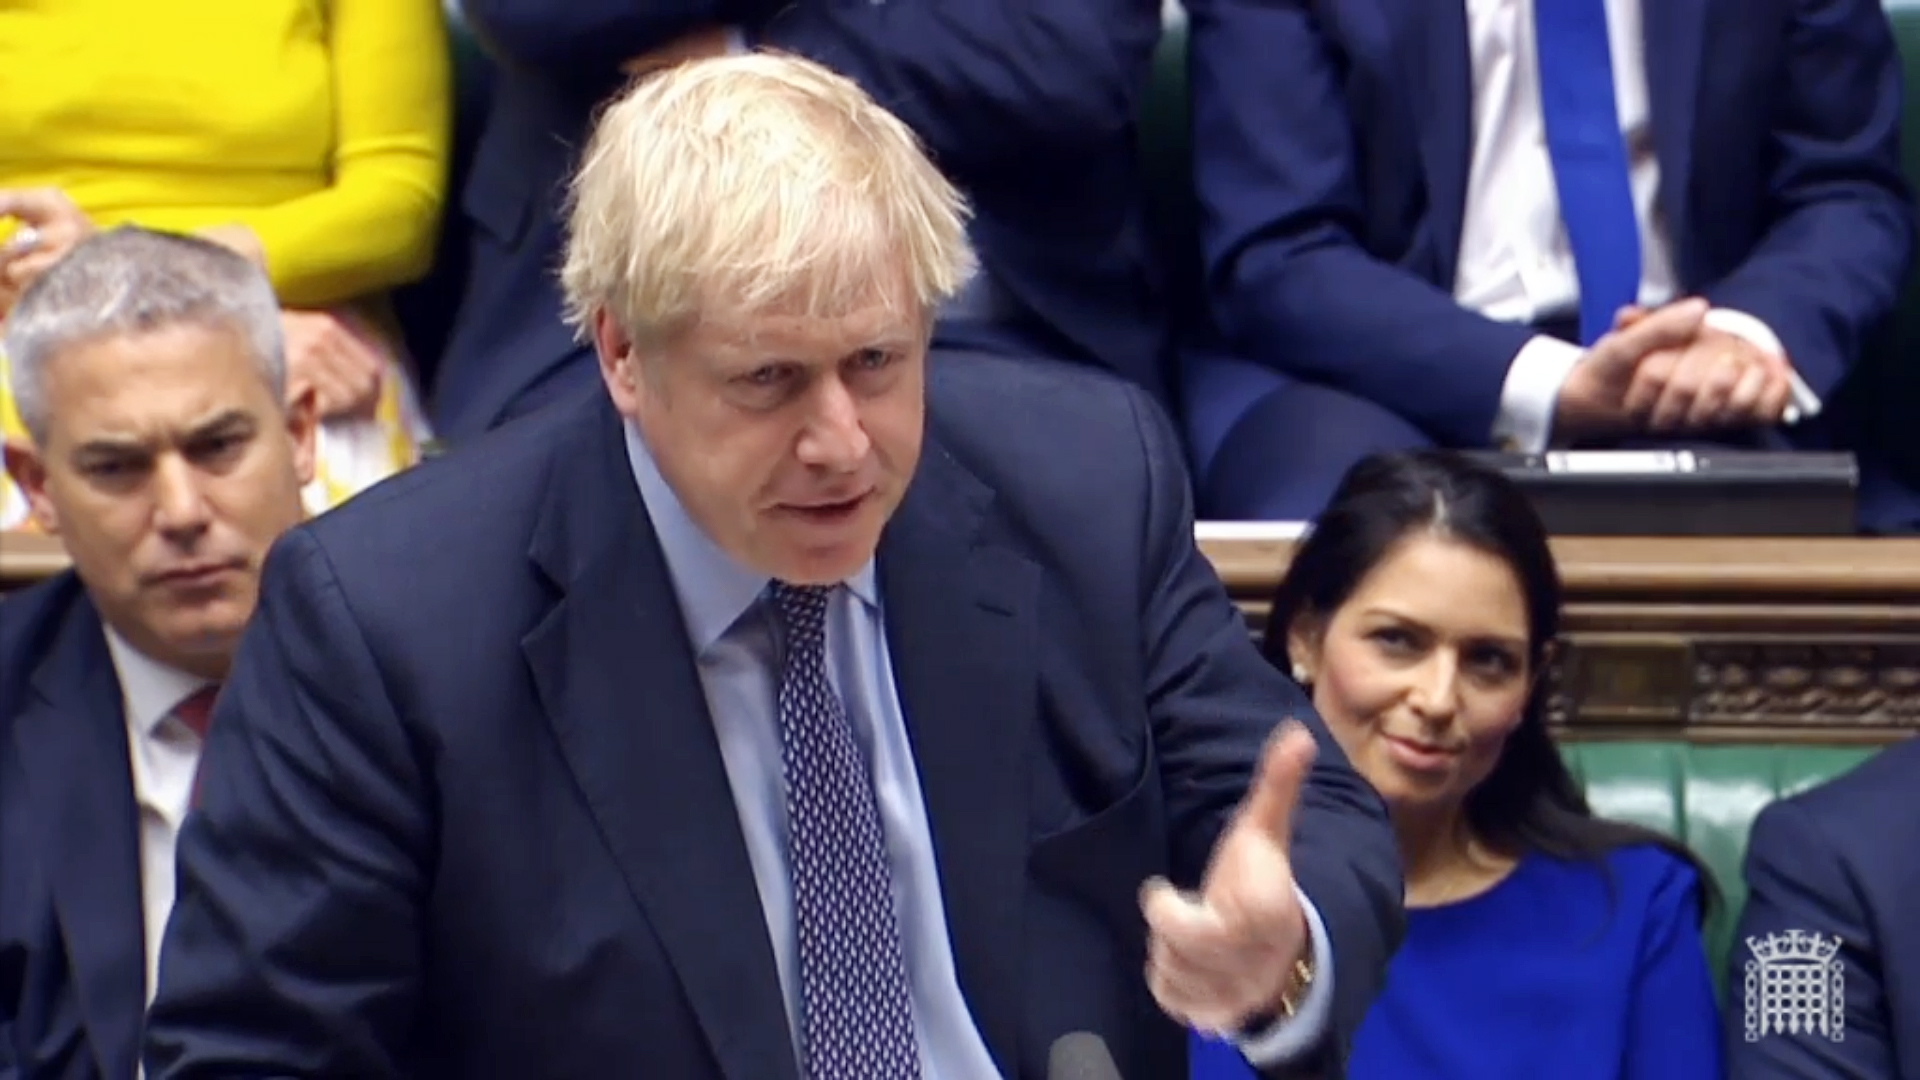 epa07932555 A grab from a handout video made available by the UK Parliamentary Recording Unit shows British Prime Minister Boris Johnson delivering a speech to MPs at the House of Commons in London, Britain, 19 October 2019. The European Union (EU) and the British government reached a tentative deal on Brexit that must be ratified by the UK Parliament 19 October.  EPA/UK PARLIAMENTARY RECORDING UNIT HANDOUT MANDATORY CREDIT: UK PARLIAMENTARY RECORDING UNIT HANDOUT EDITORIAL USE ONLY/NO SALES